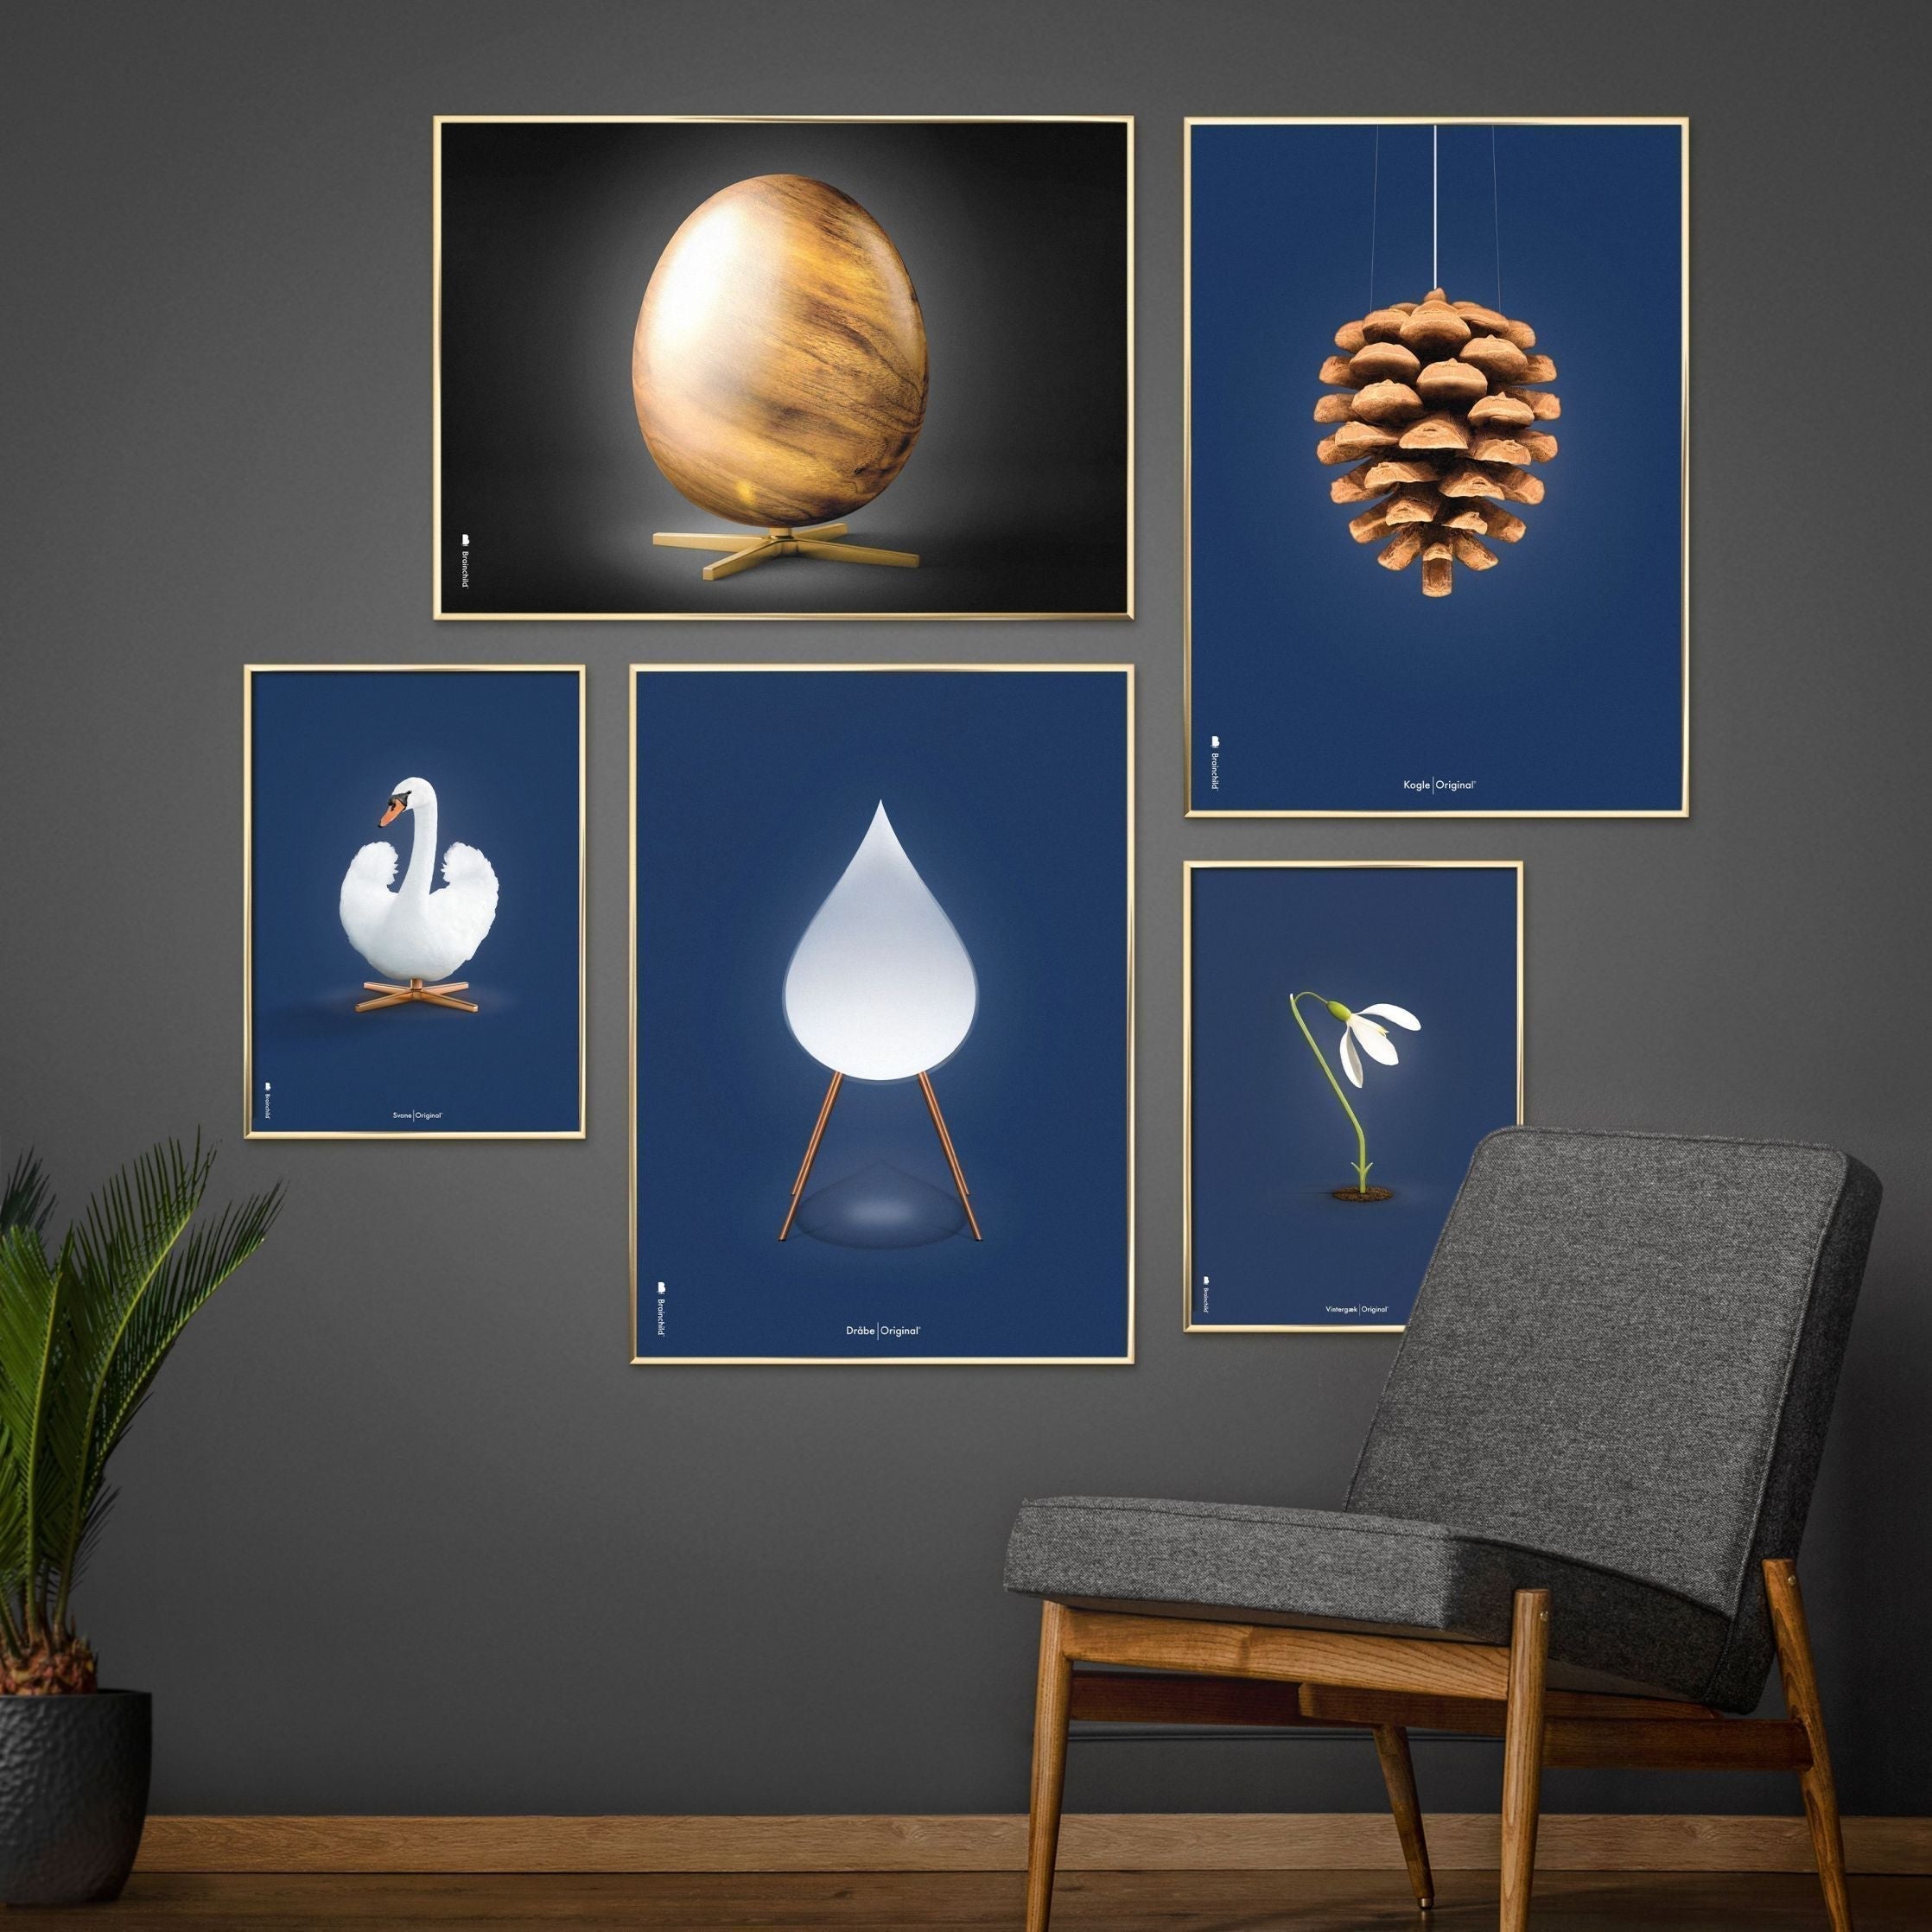 Brainchild Drops Classic Poster, Frame In Black Lacquered Wood 30x40 Cm, Dark Blue Background